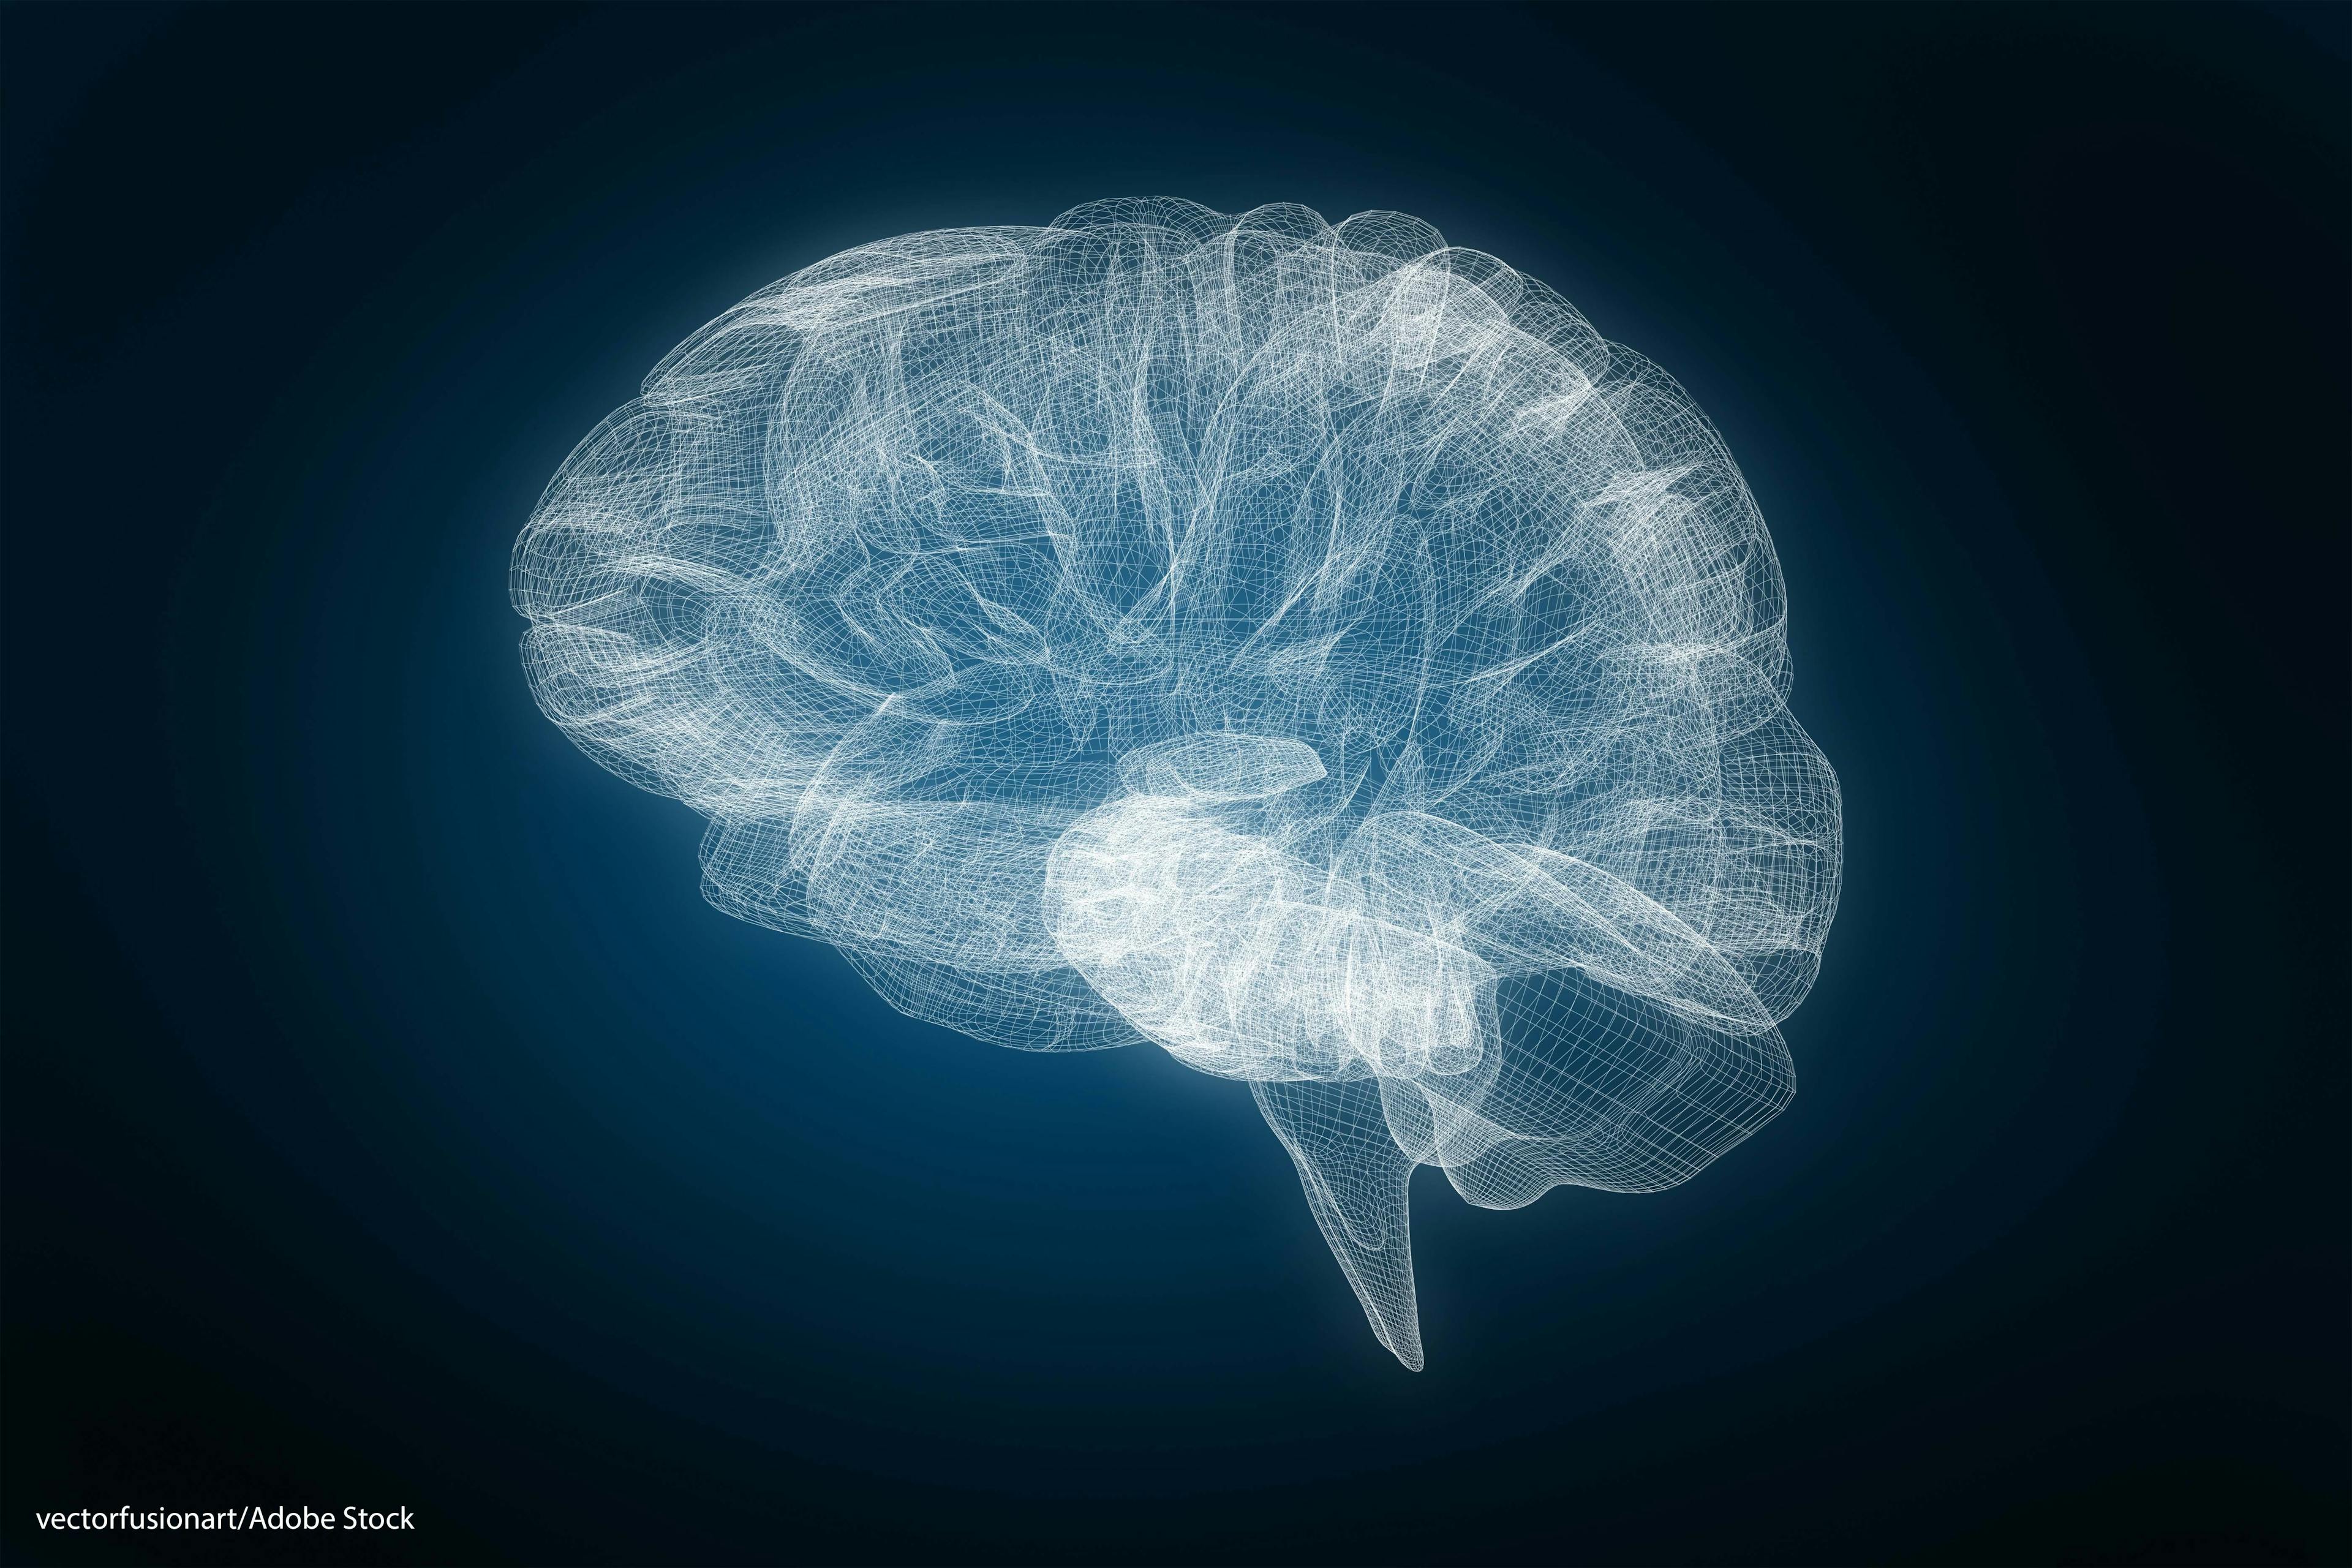 Brain Imaging May Predict When Liquid Biopsy Would Produce Clinically Actionable Information